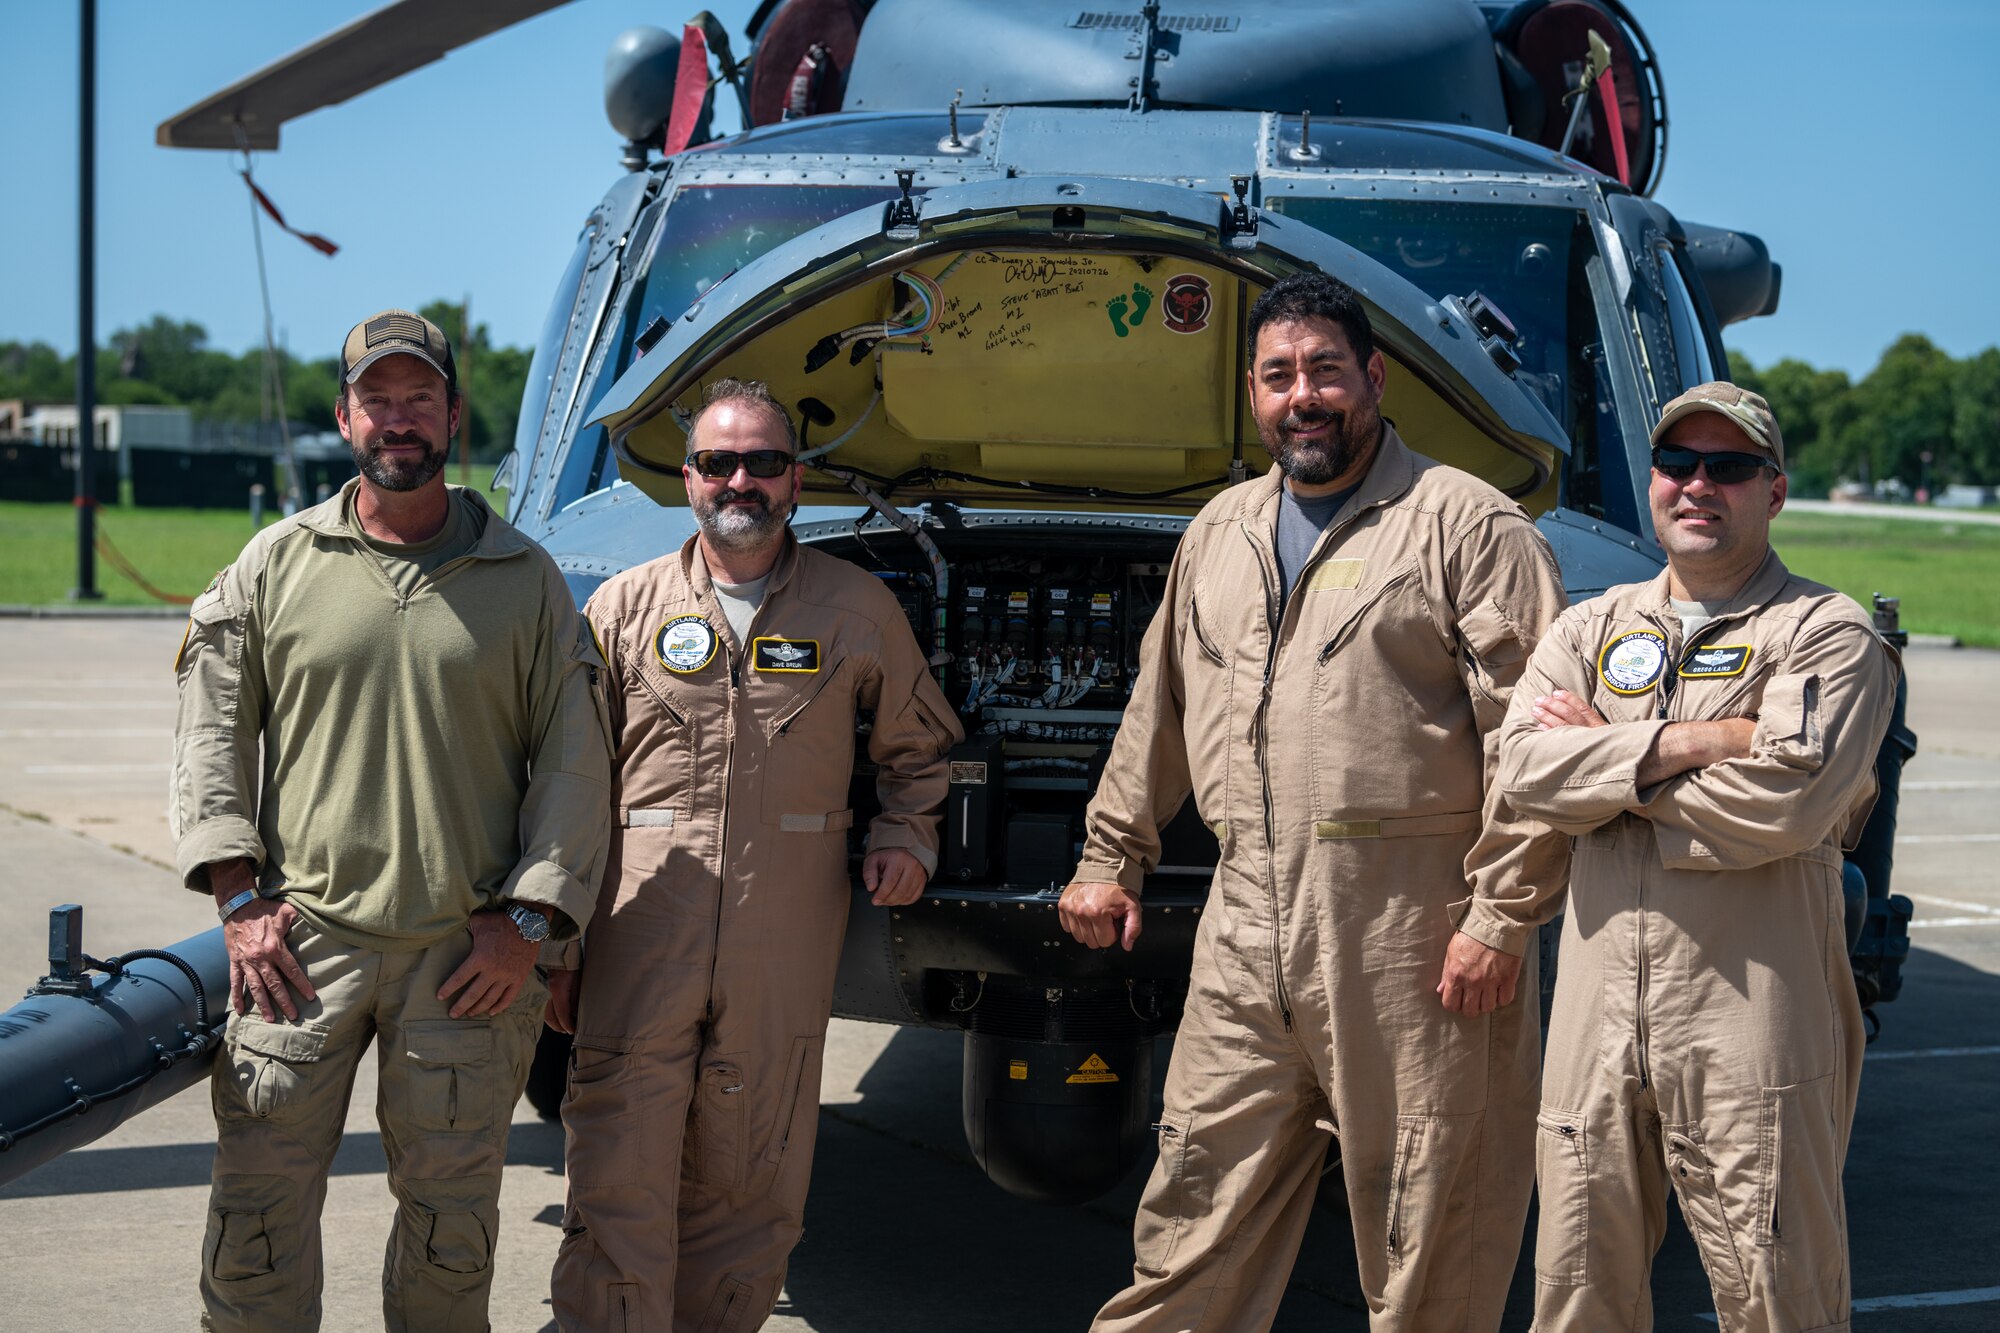 Crew stands in front of helicopter they've delivered.